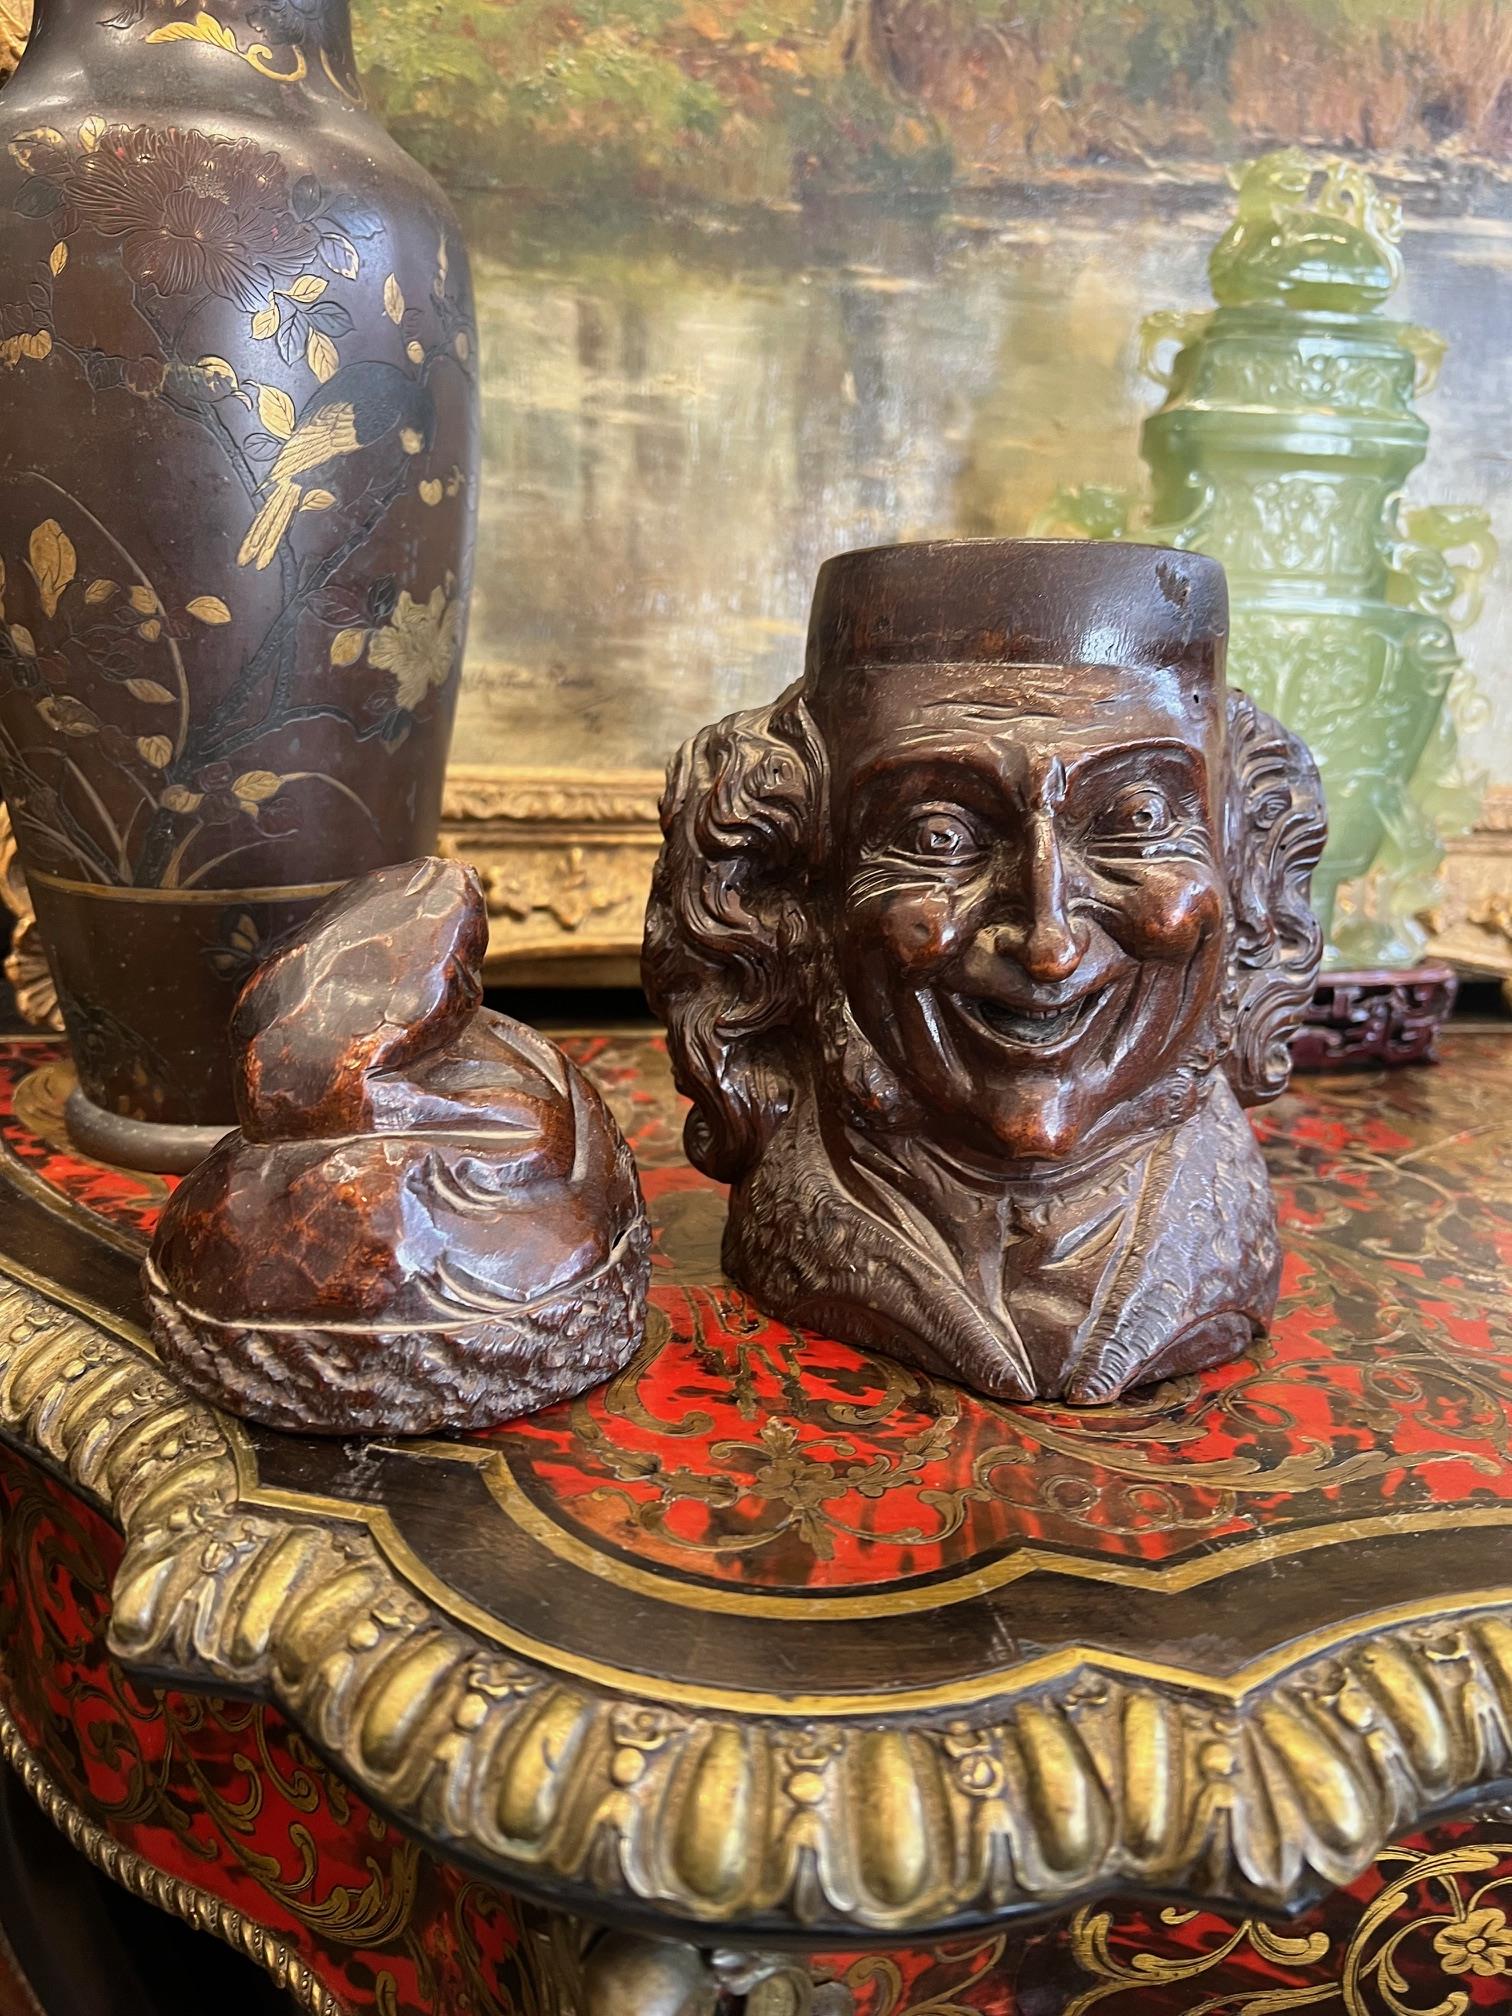 A LATE 19TH CENTURY BLACK FOREST CARVED WOOD TOBACCO JAR IN THE FORM OF VOLTAIRE - Image 3 of 4